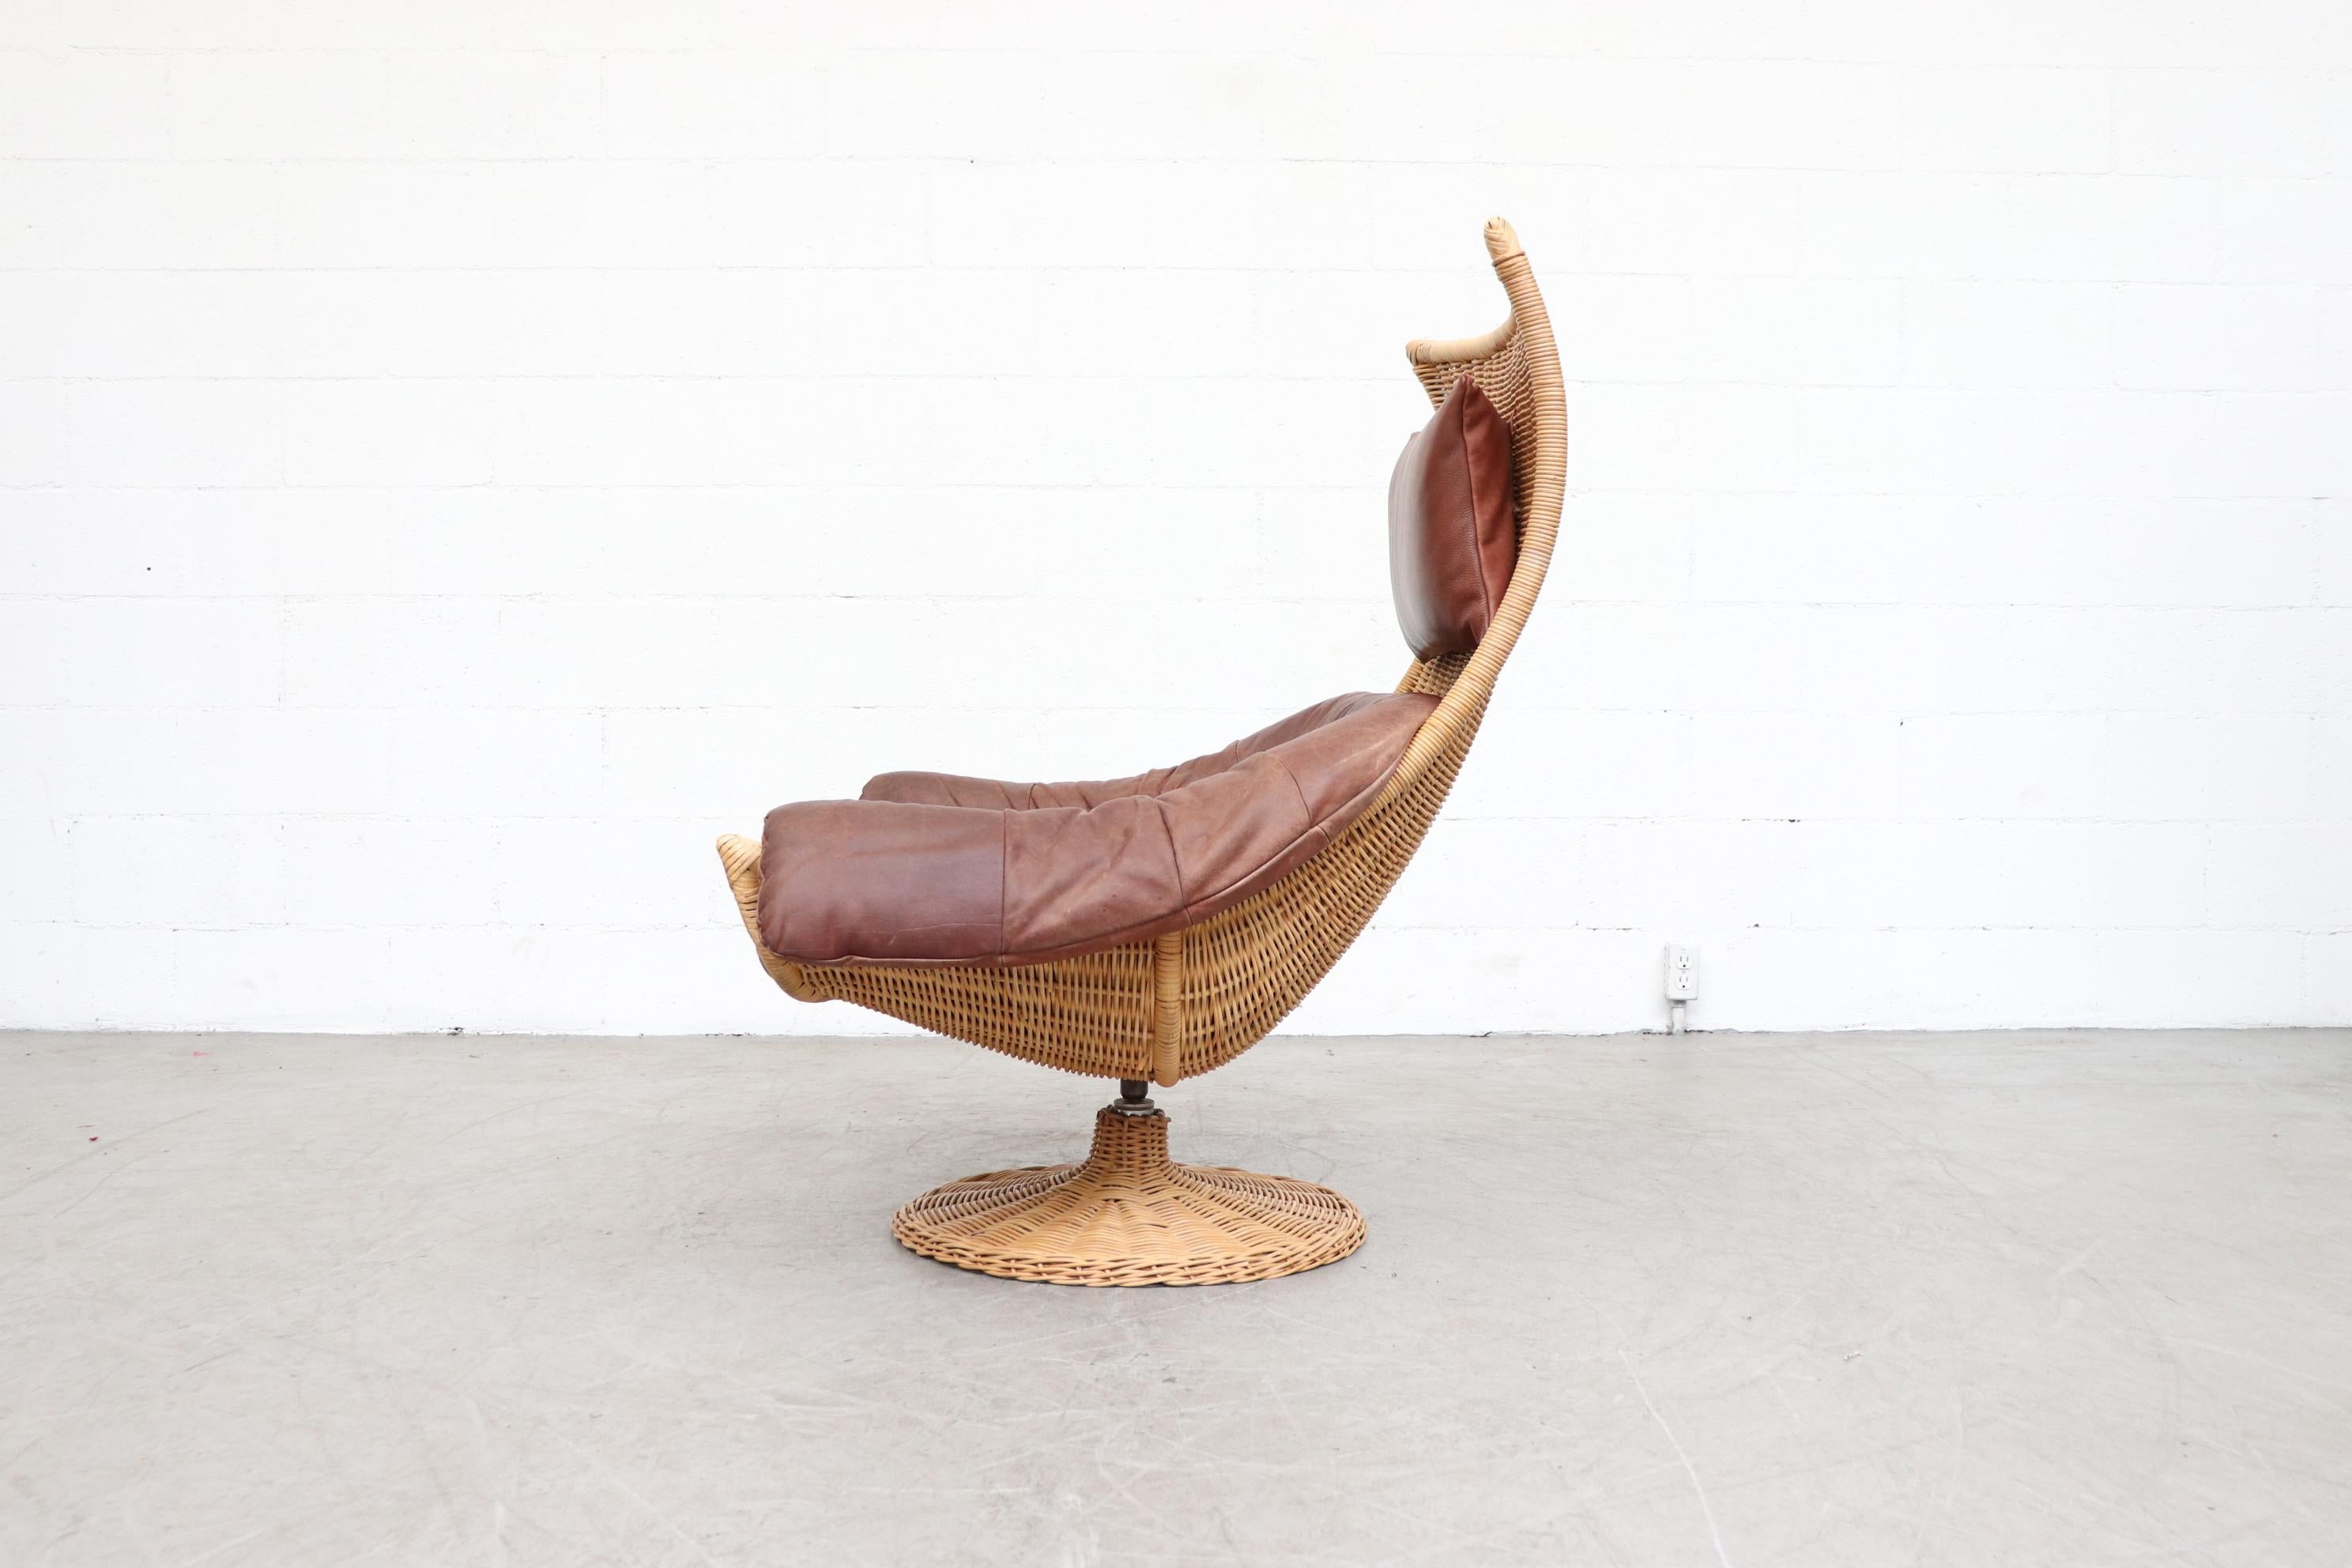 Gerard Van Den Berg swivel lounge chair. Natural woven rattan frame contrasted beautifully with rust leather cushion and headrest. In original condition with some visible wear consistent with age and use.